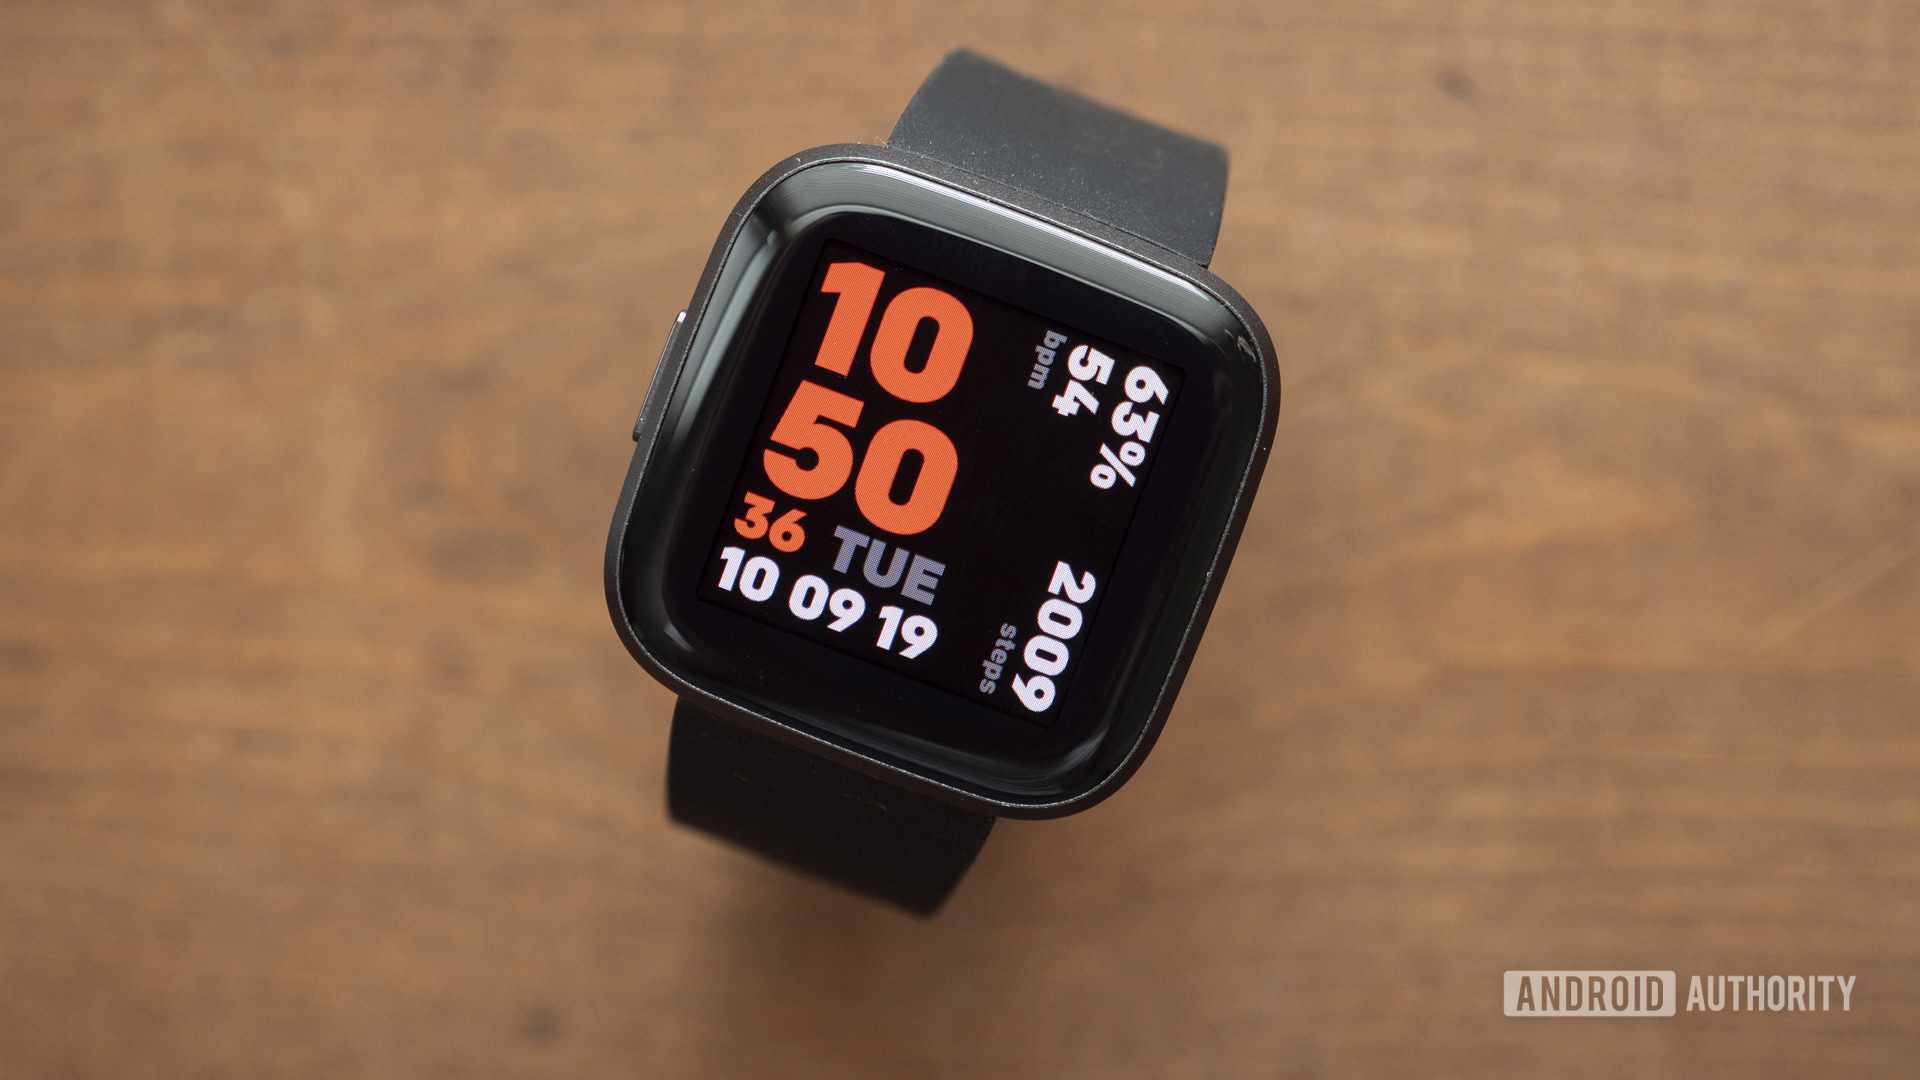 Fitbit Versa 3 review: A solid smartwatch with great fitness